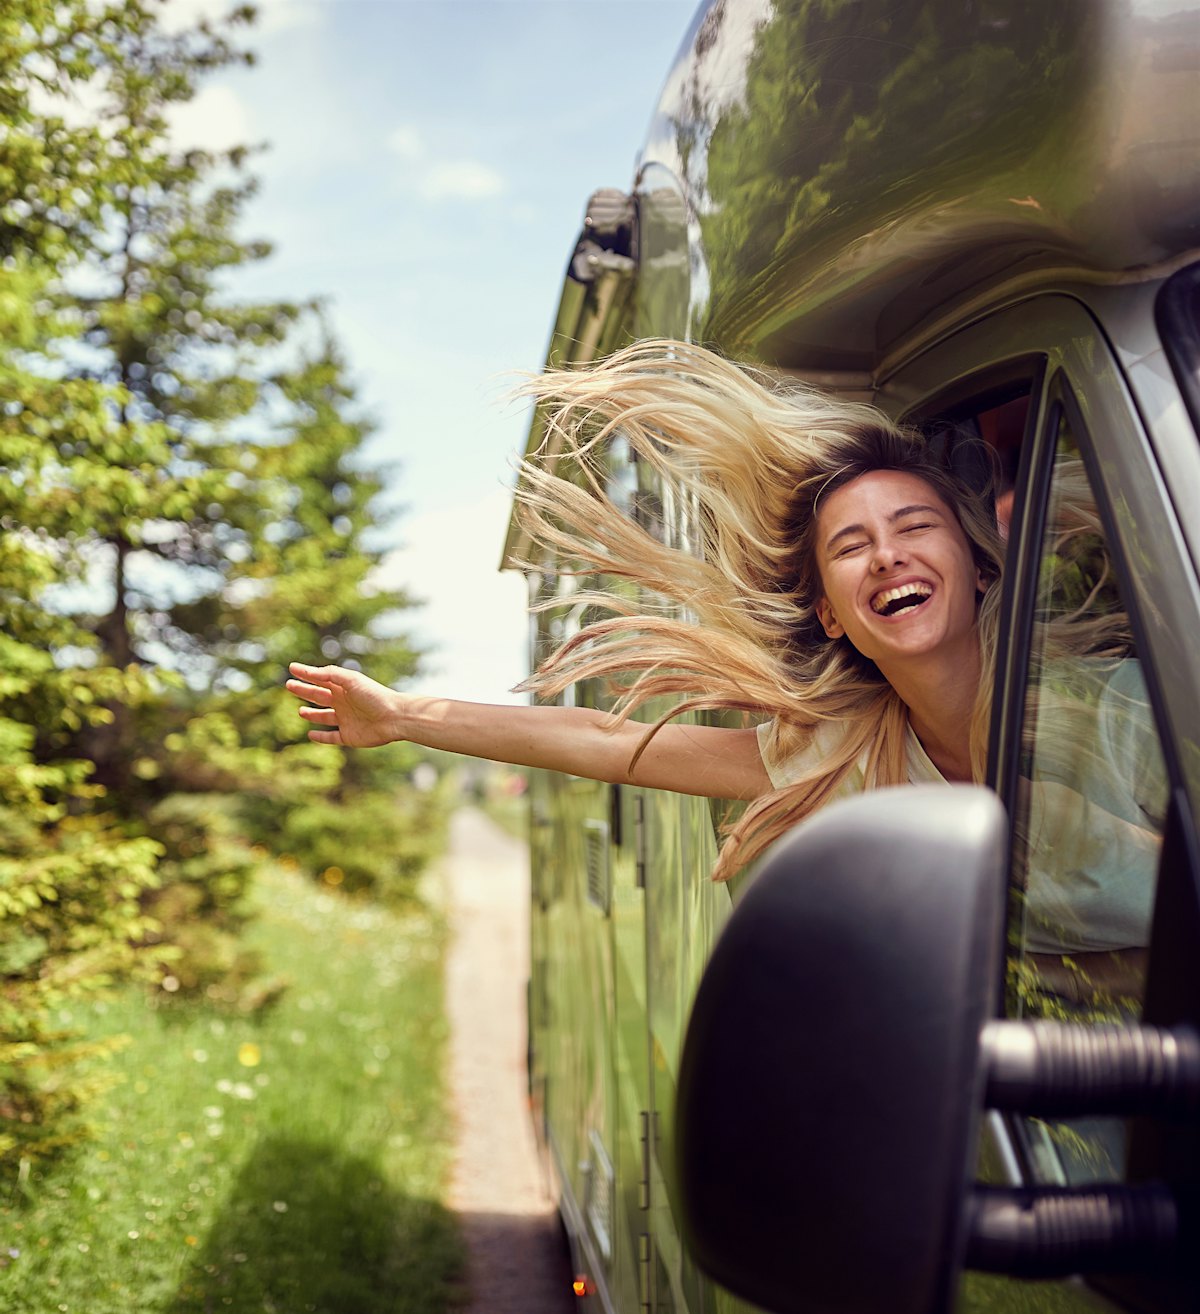 Blonde woman on the window of an rv with hands out smiling enjoying ride.Transport, roadtrip, nature concept.